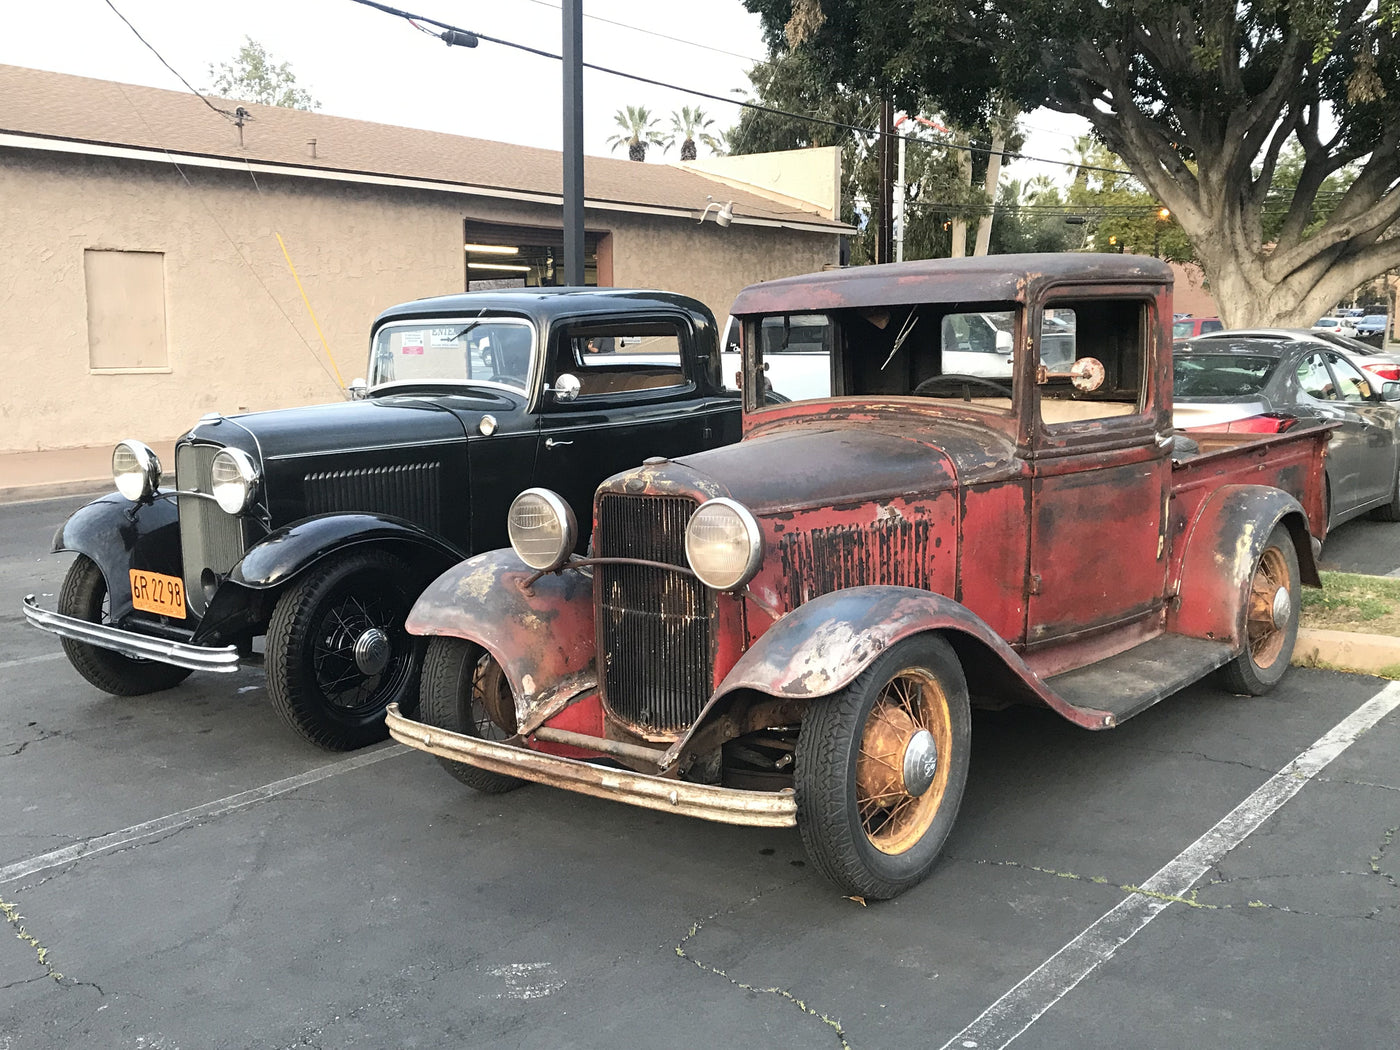 www.EarlyFordStore.com San Dimas, California (909) 305-1955 Early Ford Parts - 1928-1959 & Early Hot Rod Parts